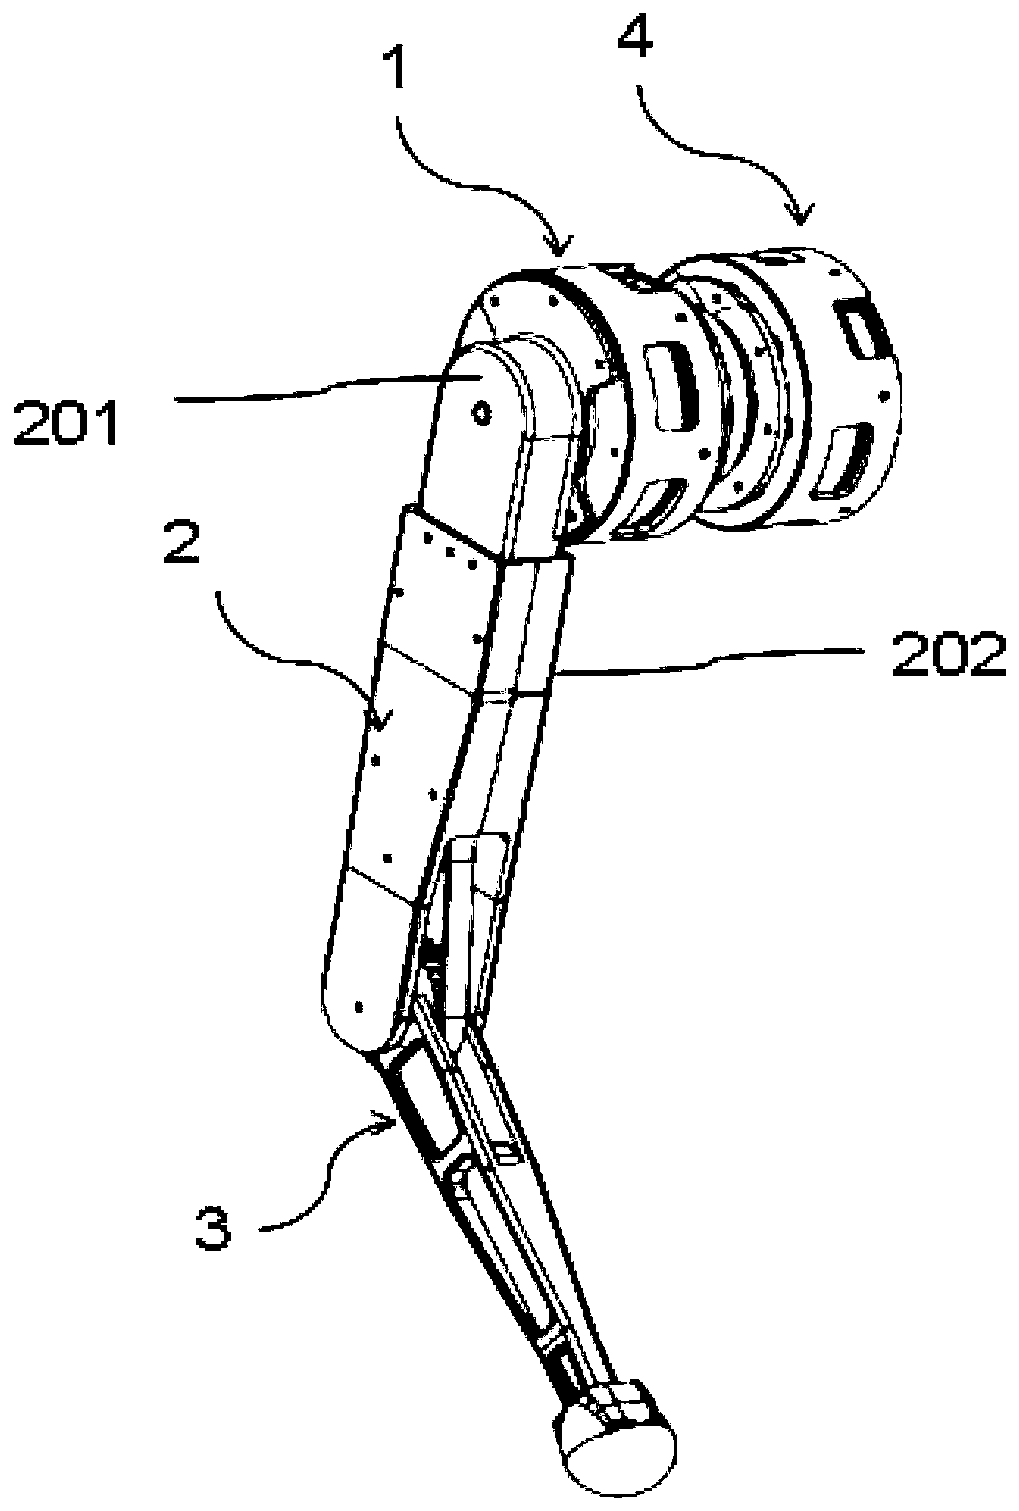 Modular foot-type single leg and cycloid planning method based on low reduction ratio motor technology